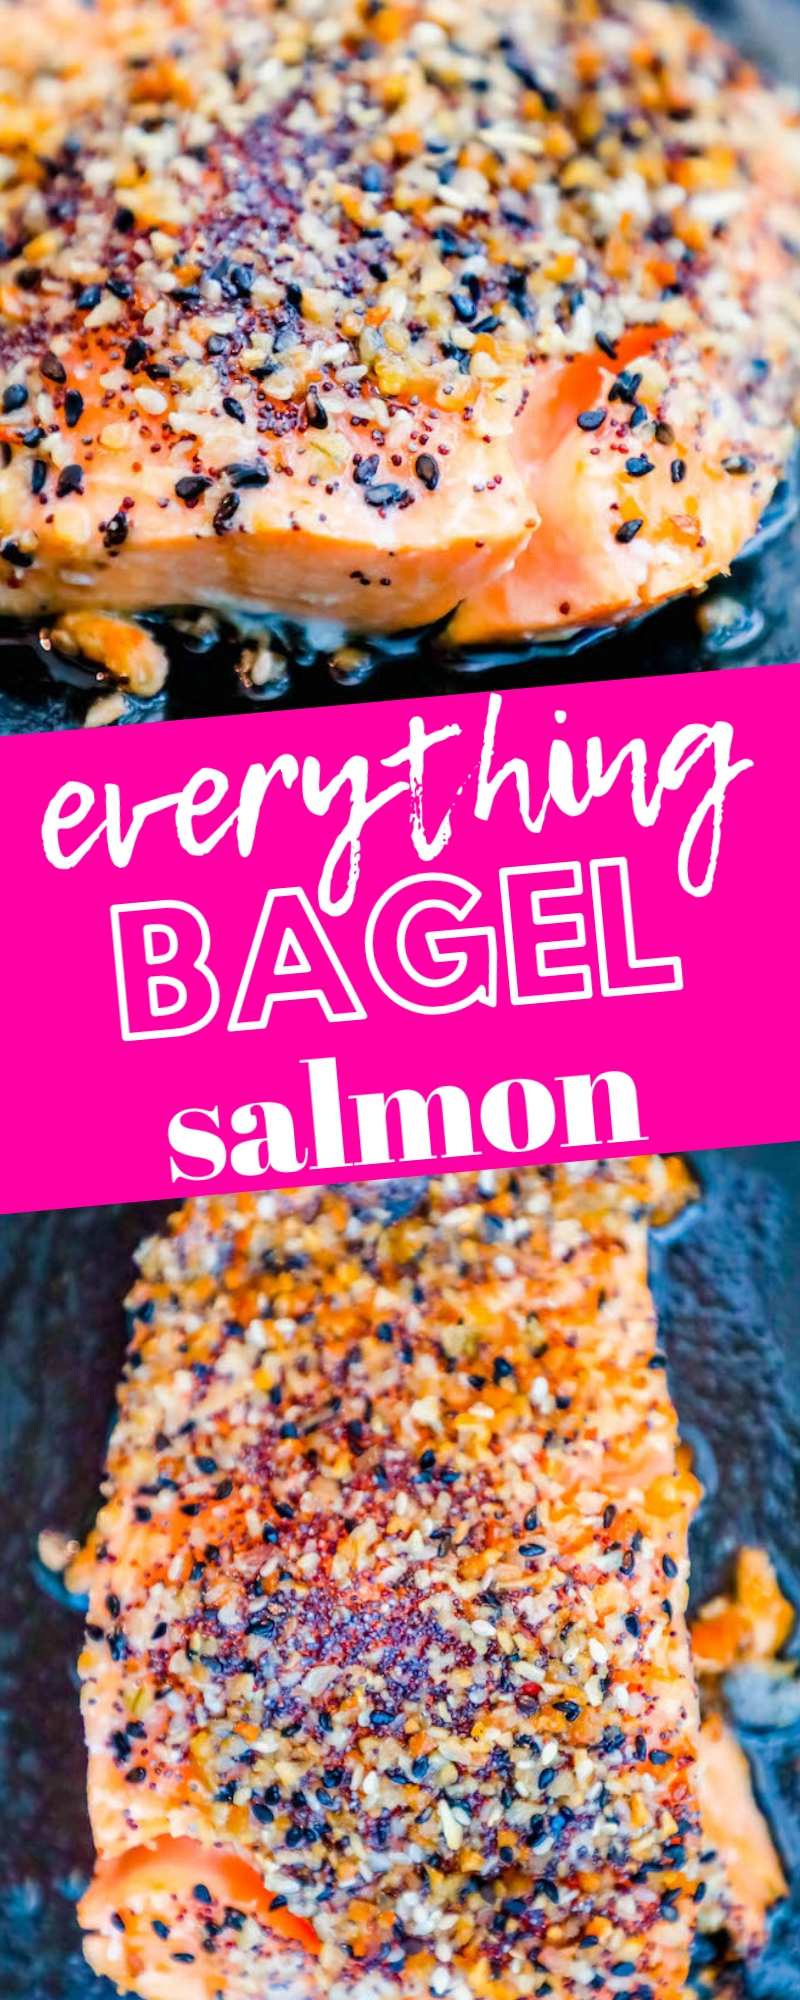 salmon in a pan covered in everything bagel mix